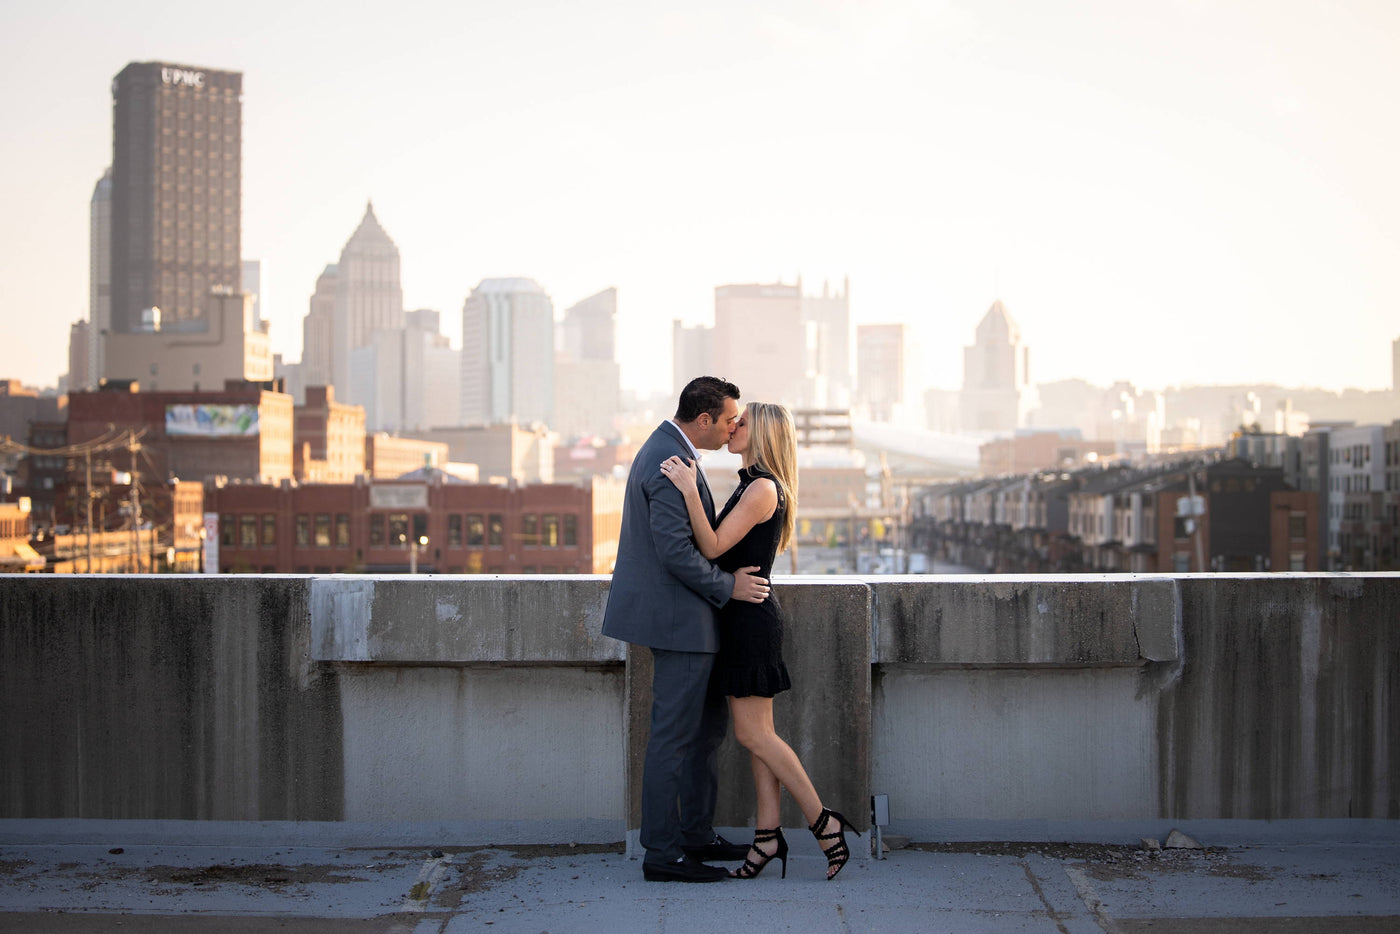 Henne Engagement Ring Couple Brandon & Sarah Kiss While Overlooking The City